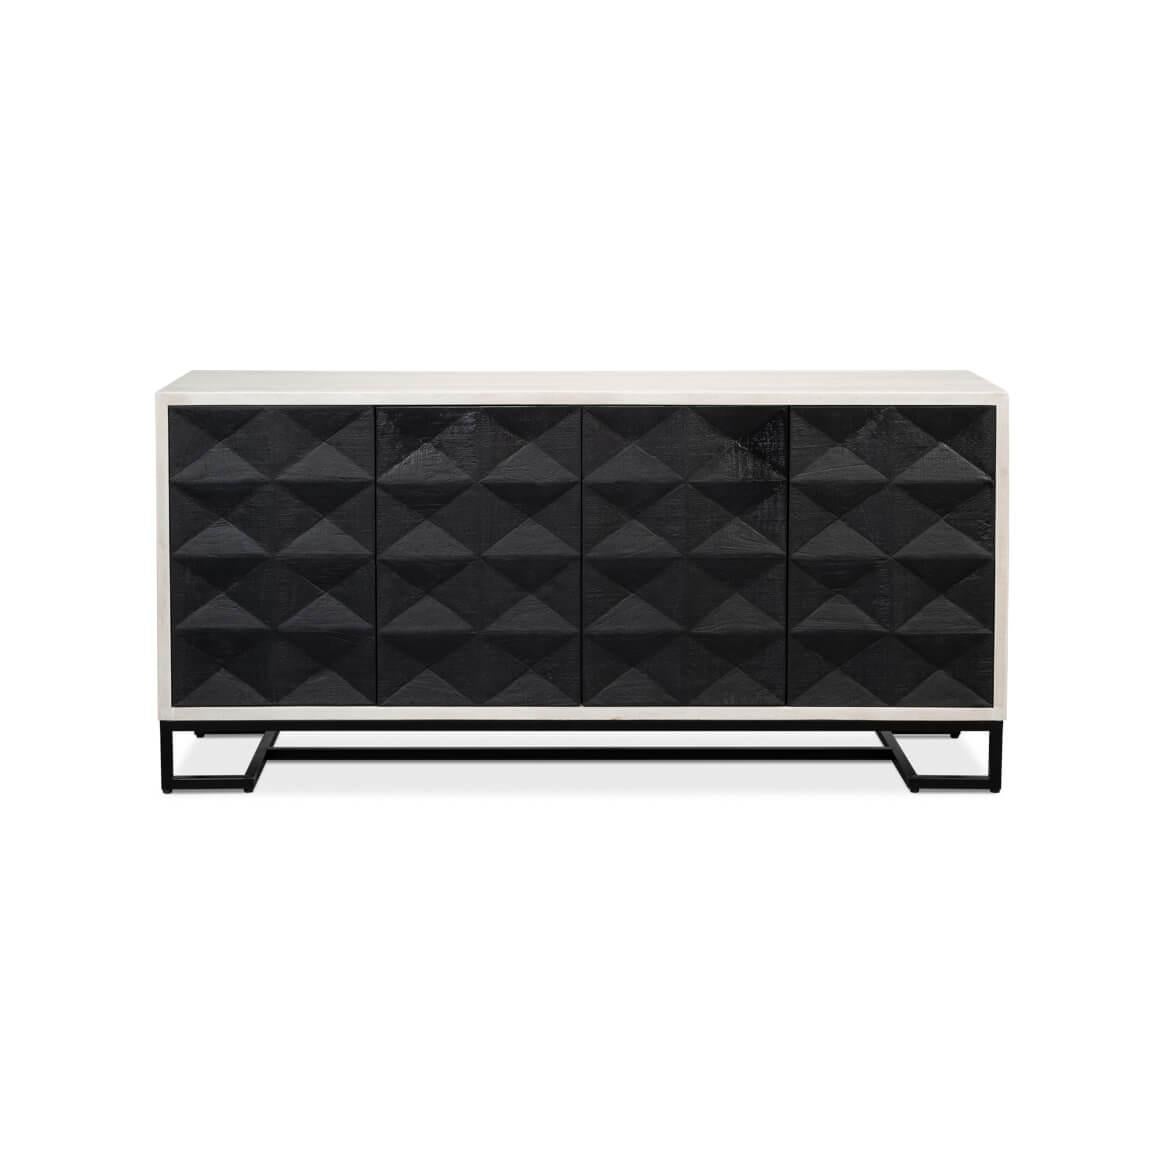 Where bold design meets practical storage. This statement piece features a striking geometric patterned facade, reminiscent of the classic styling of brutalism architecture, and offers a tactile and visual feast that instantly draws the eye. 

The